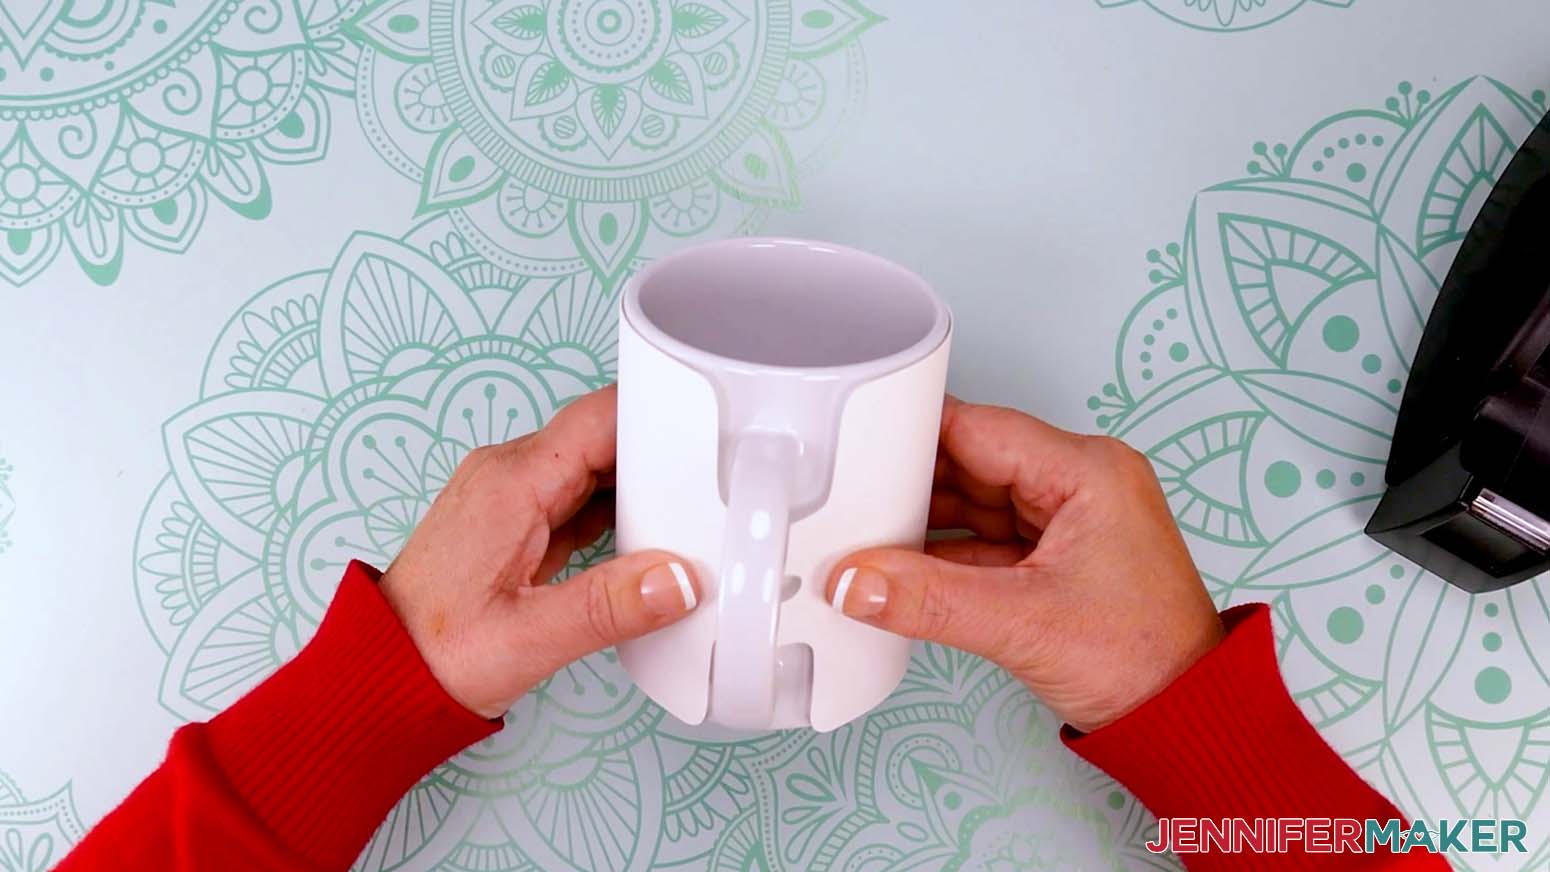 With the drawing facing up and toward the mug and oriented correctly, wrap the design tightly around the mug with the ends coming together under the handle.